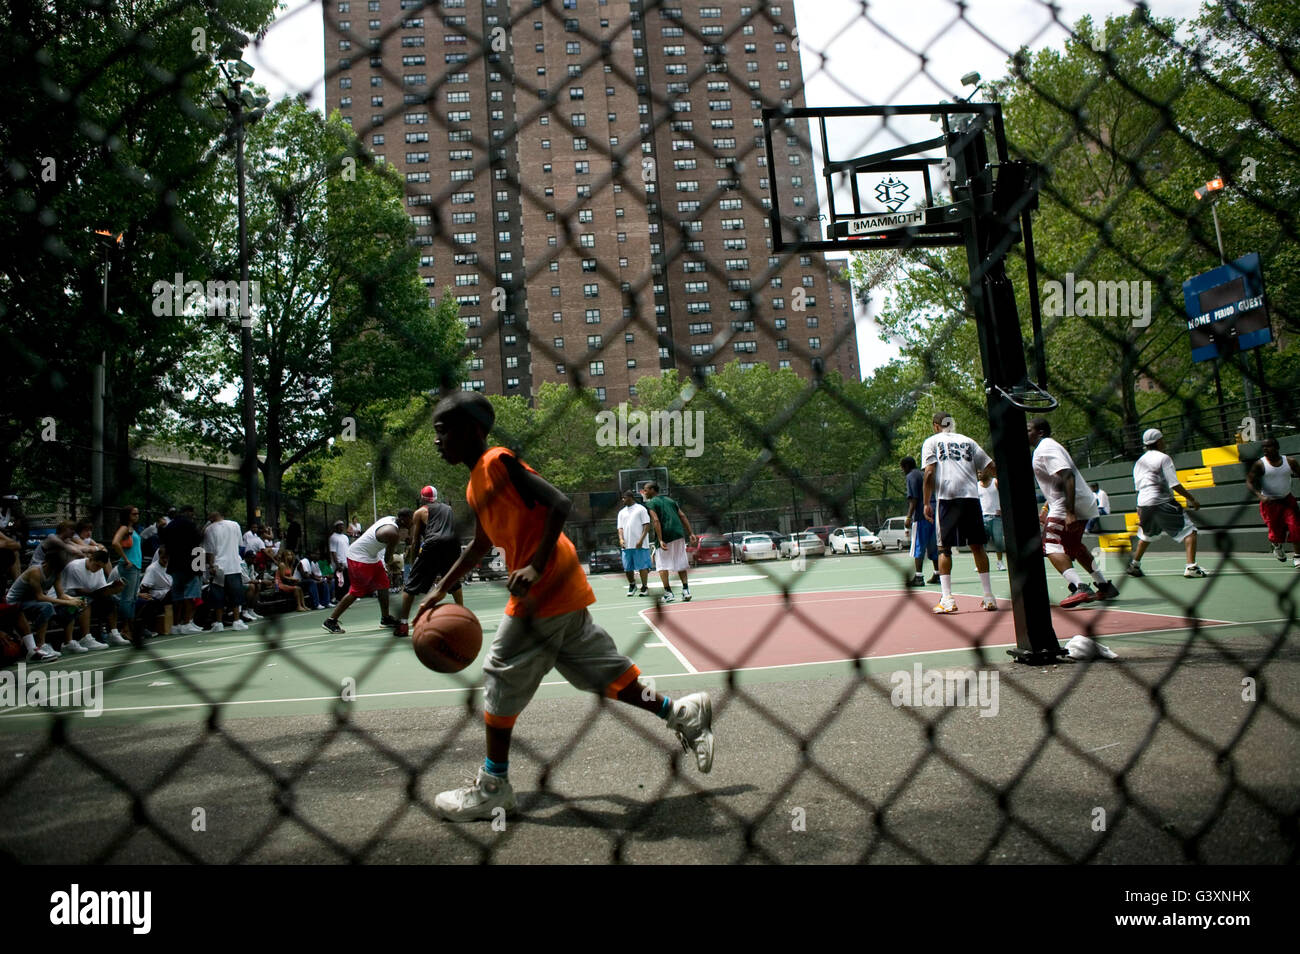 A boy passes behind the court where tryouts for the Rucker's street basketball tournament are taking place at Rucker Park in Har Stock Photo